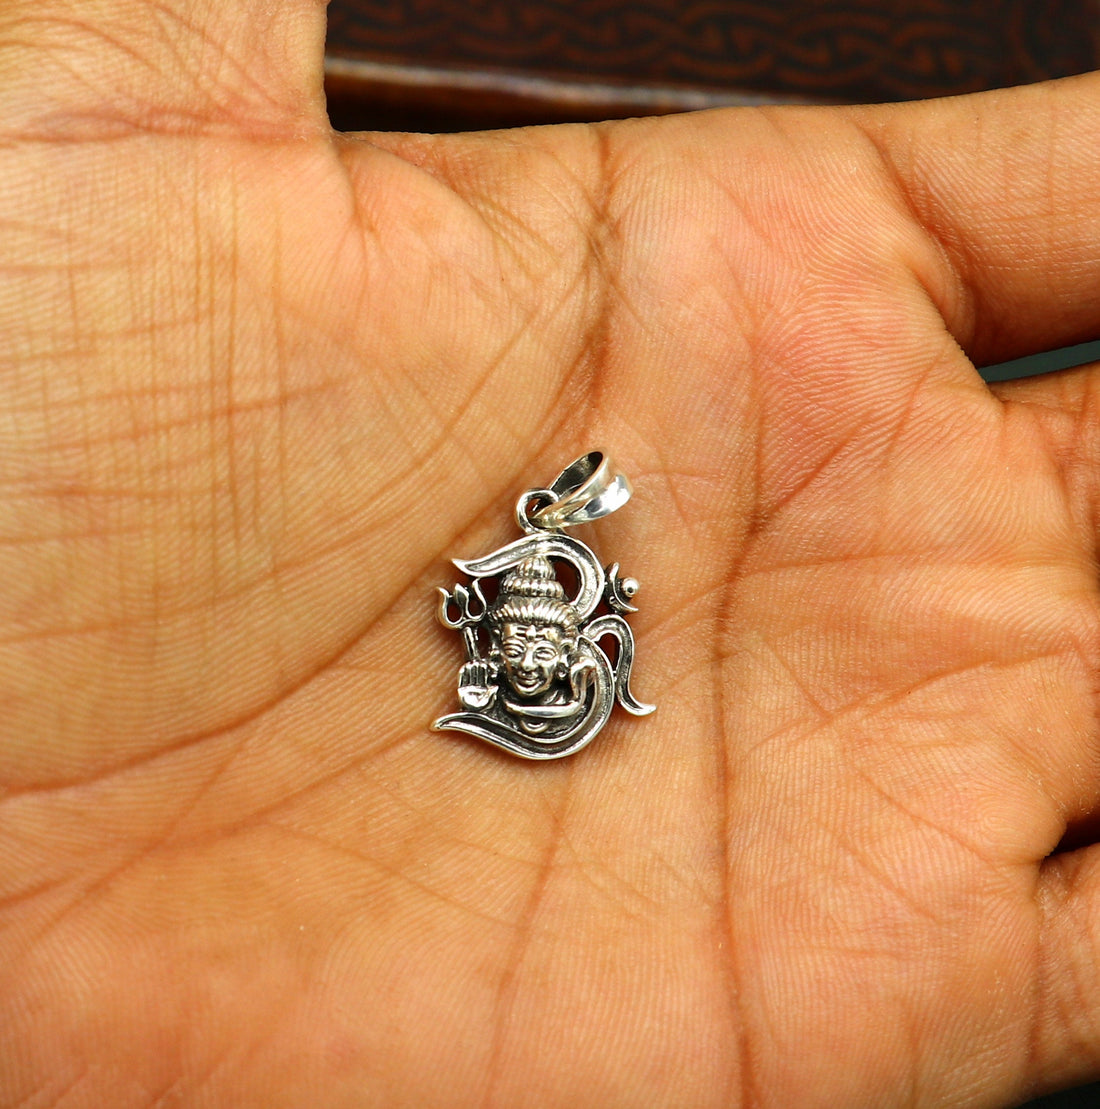 925 sterling silver customize vintage antique style Idol Lord Shiva Pendant, amazing design stunning pendant unisex gifting jewelry ssp551 - TRIBAL ORNAMENTS